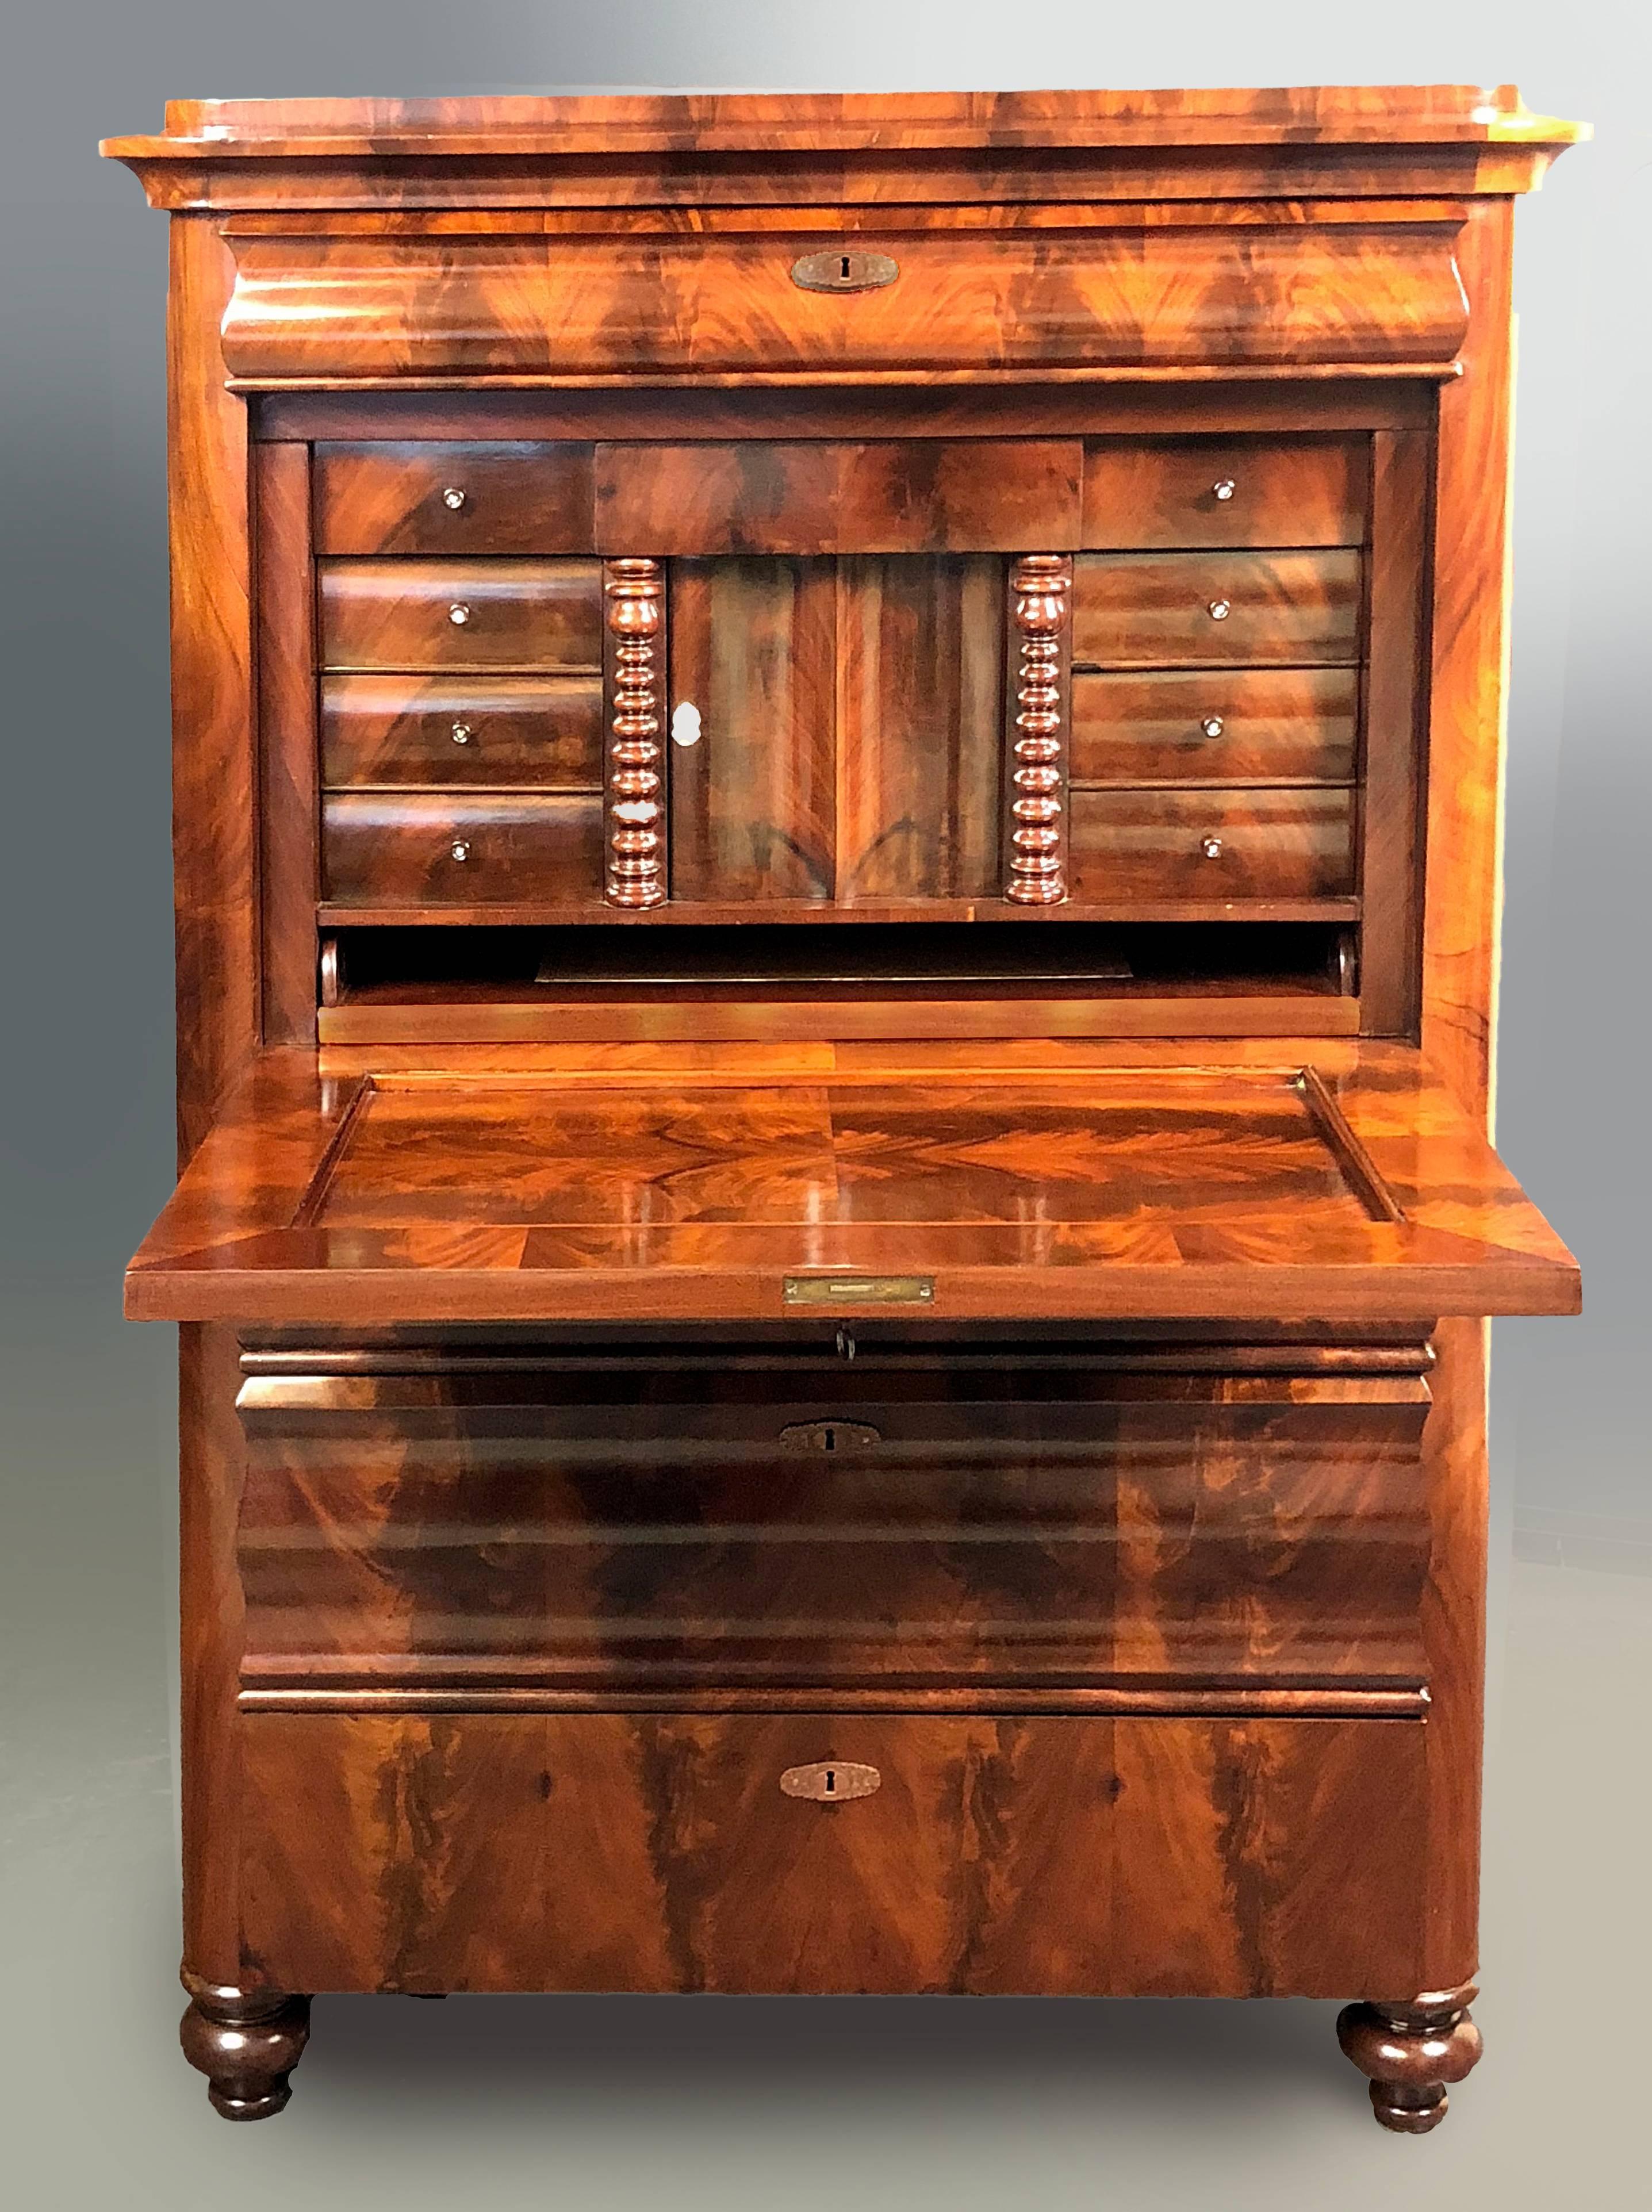 Fine figured mahogany Secretaire a Abattant of Danish origin dating to the middle of the 19th century, exhibiting Louis Philippe influence. The fall front has interior weights and the writing surface slides outward and features a gold tooled leather